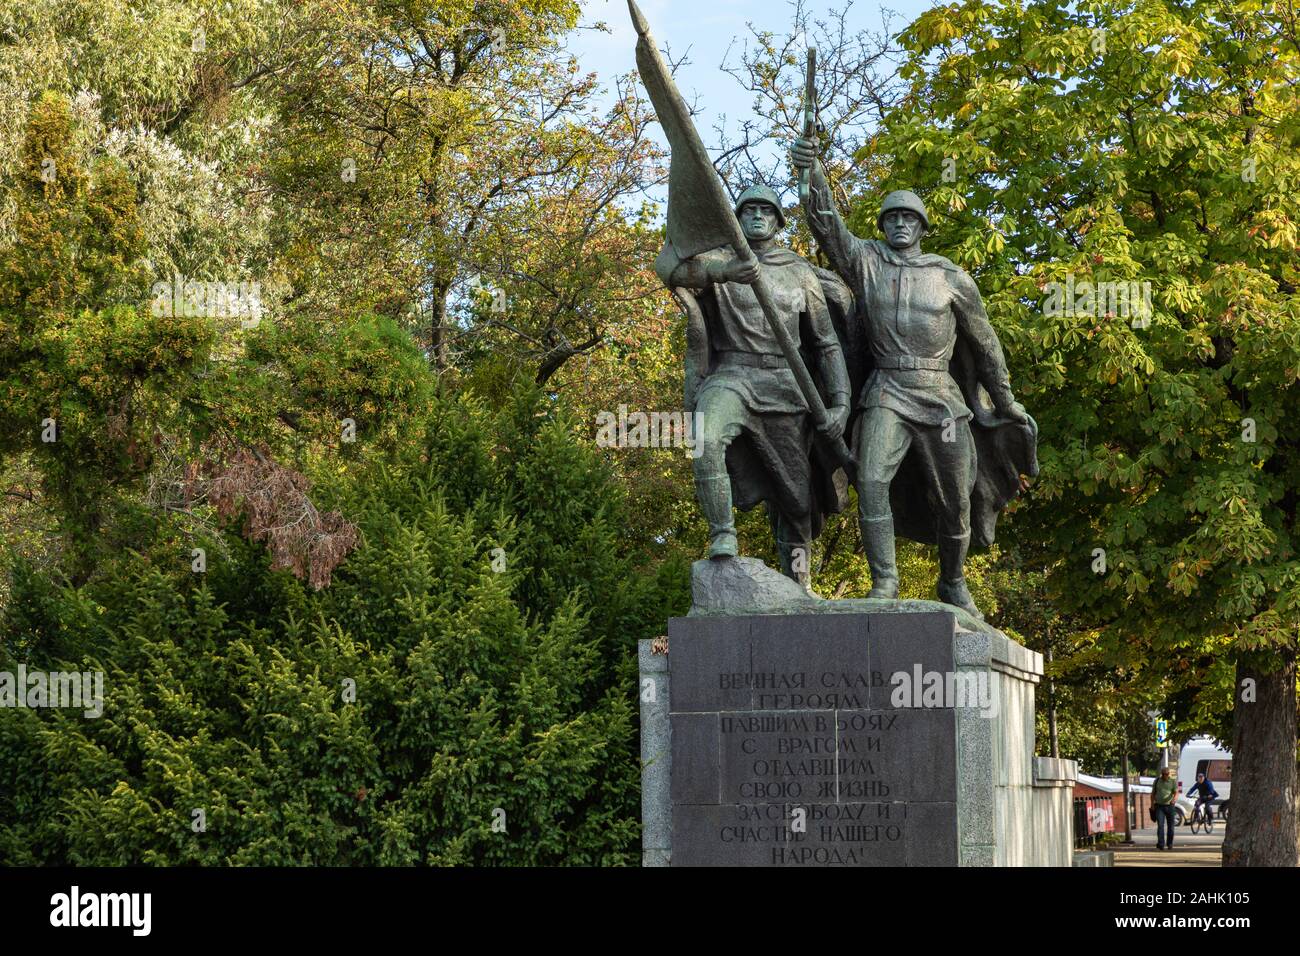 KALININGRAD, RUSSIA - SEPTEMBER 04,2019: Monument to 1200 guardsmen. The first memorial, perpetuating the feat of Soviet soldiers who died in World Wa Stock Photo